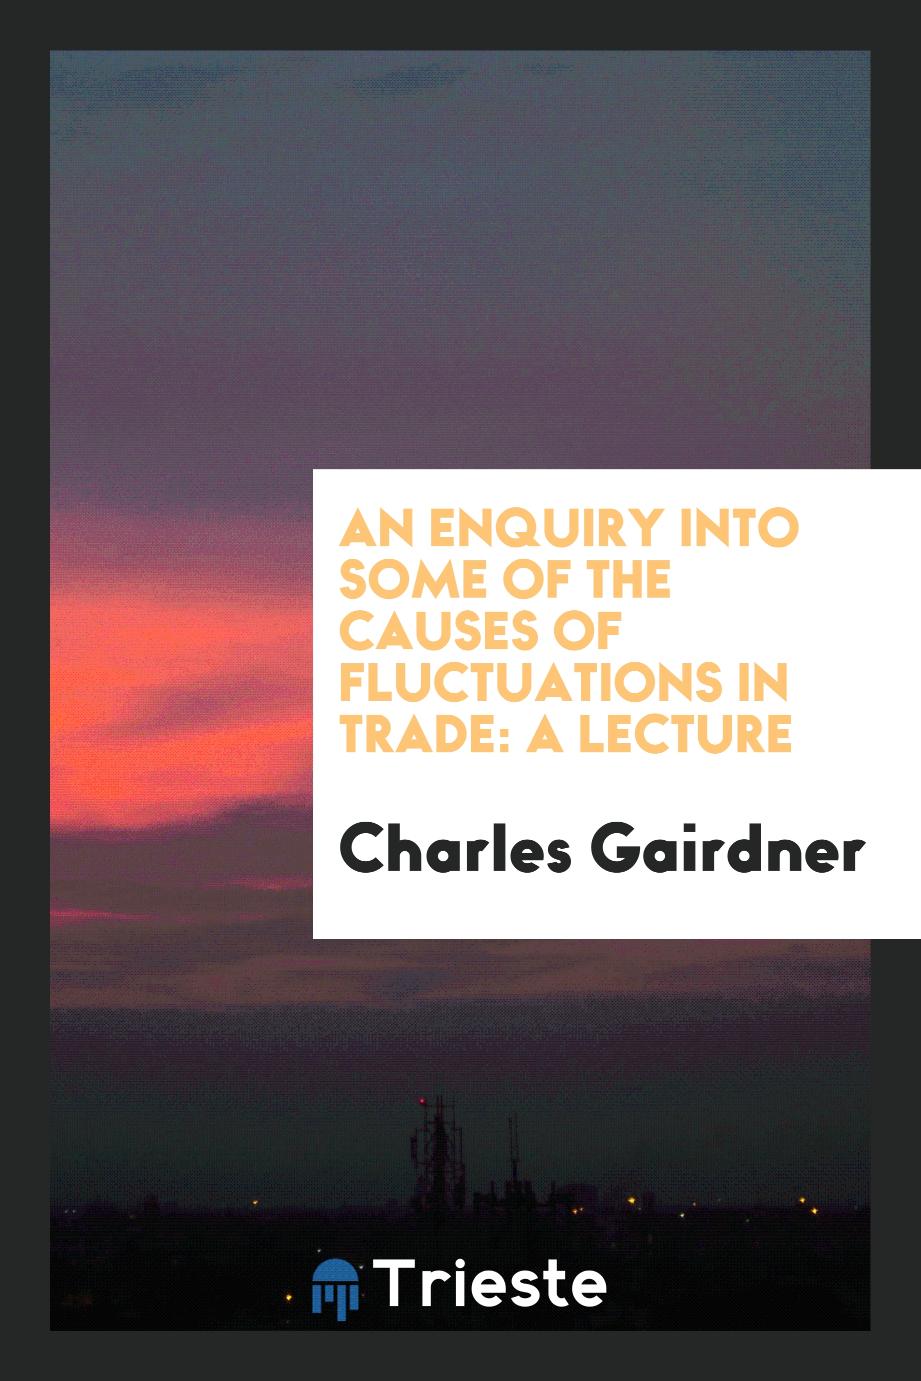 An enquiry into some of the causes of fluctuations in trade: a lecture